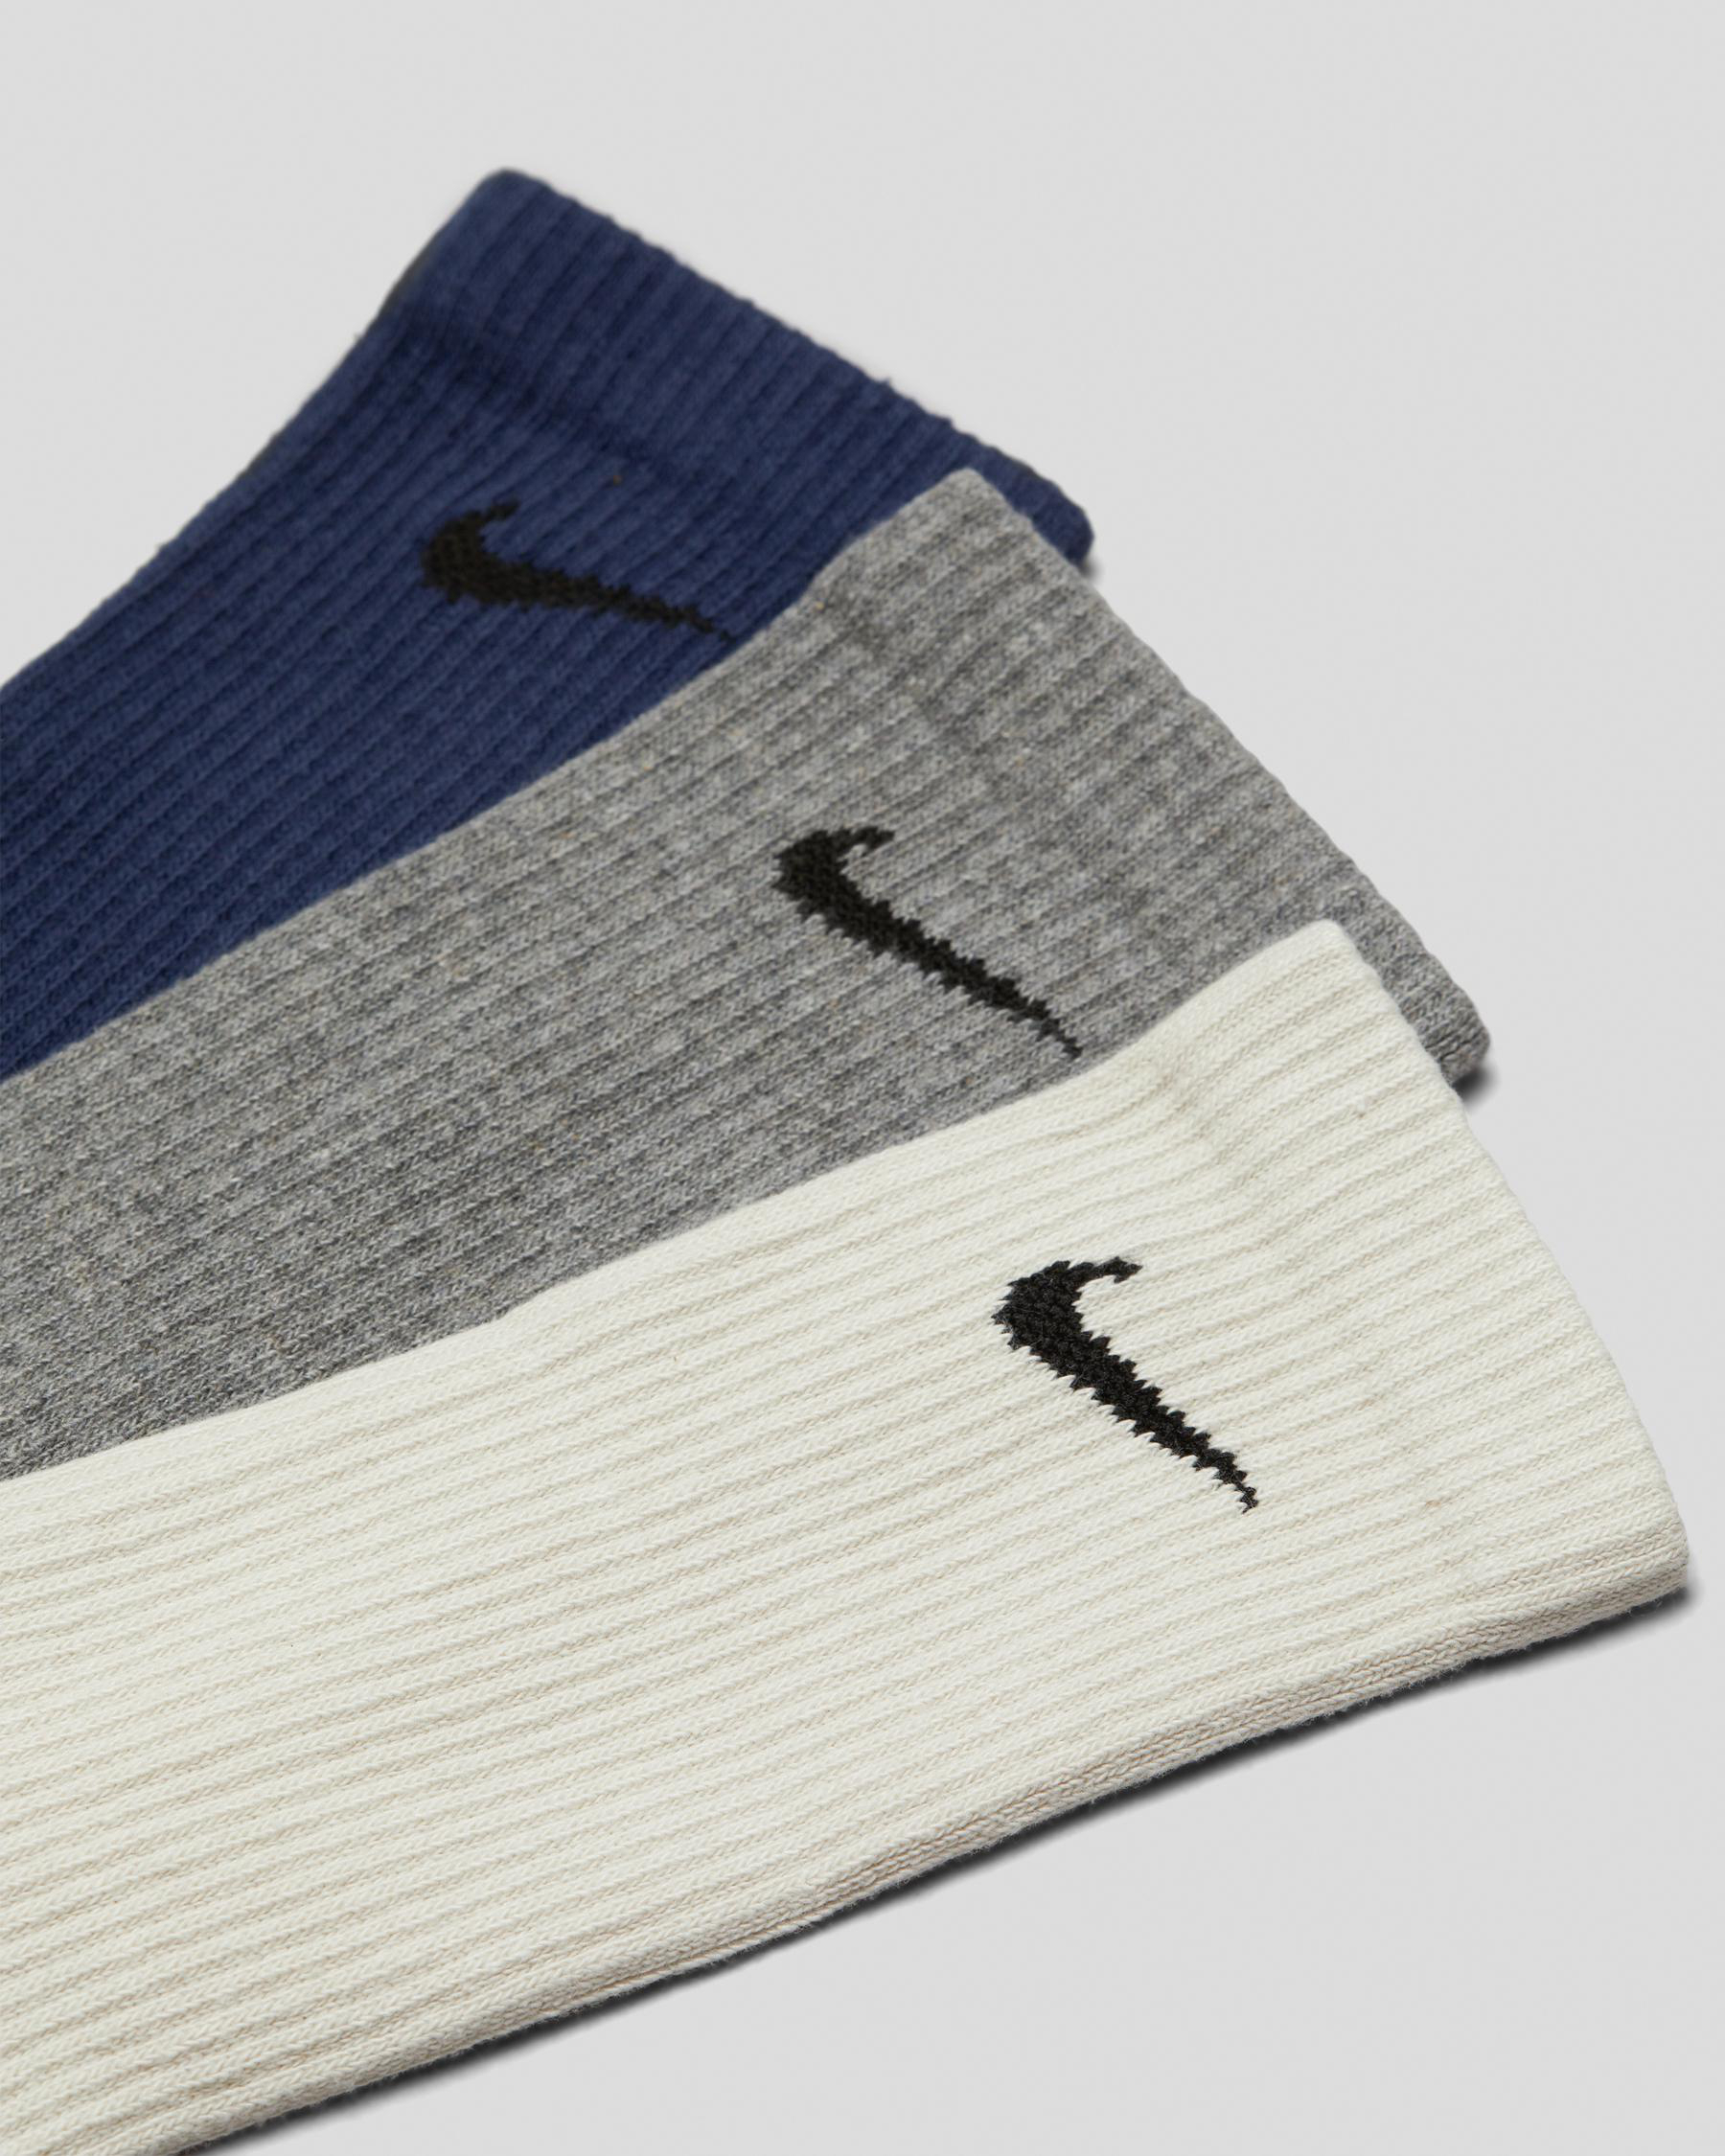 Shop Nike Everyday Plus Cushioned Crew Socks In 965 - Fast Shipping ...